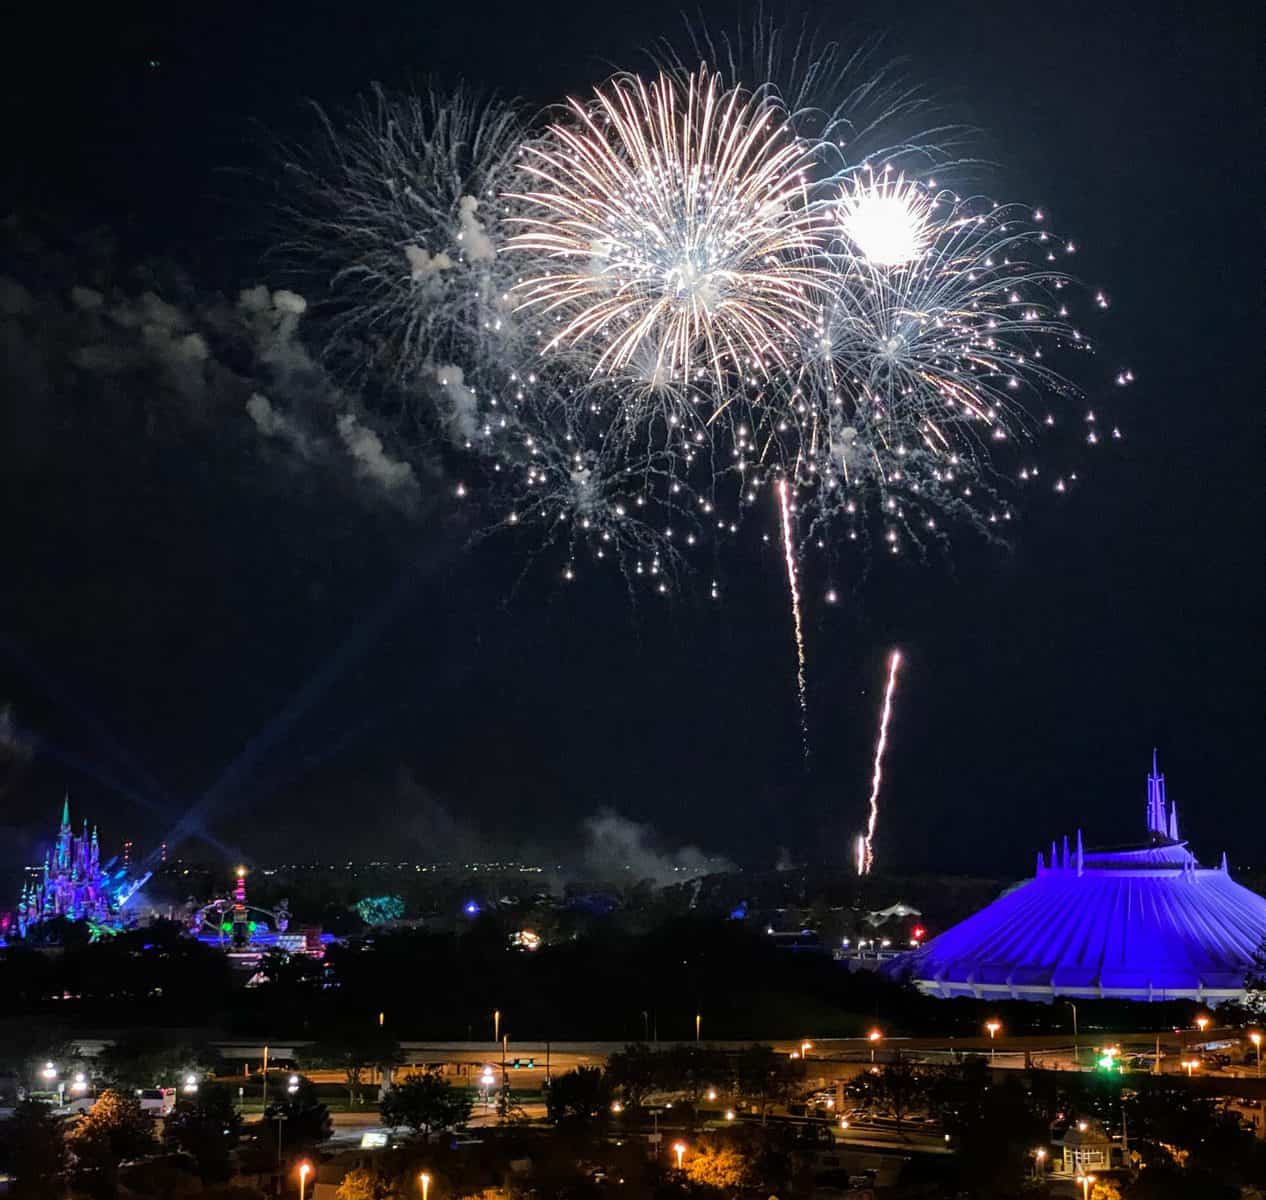 Where is the best place to watch Magic Kingdom fireworks outside the park?